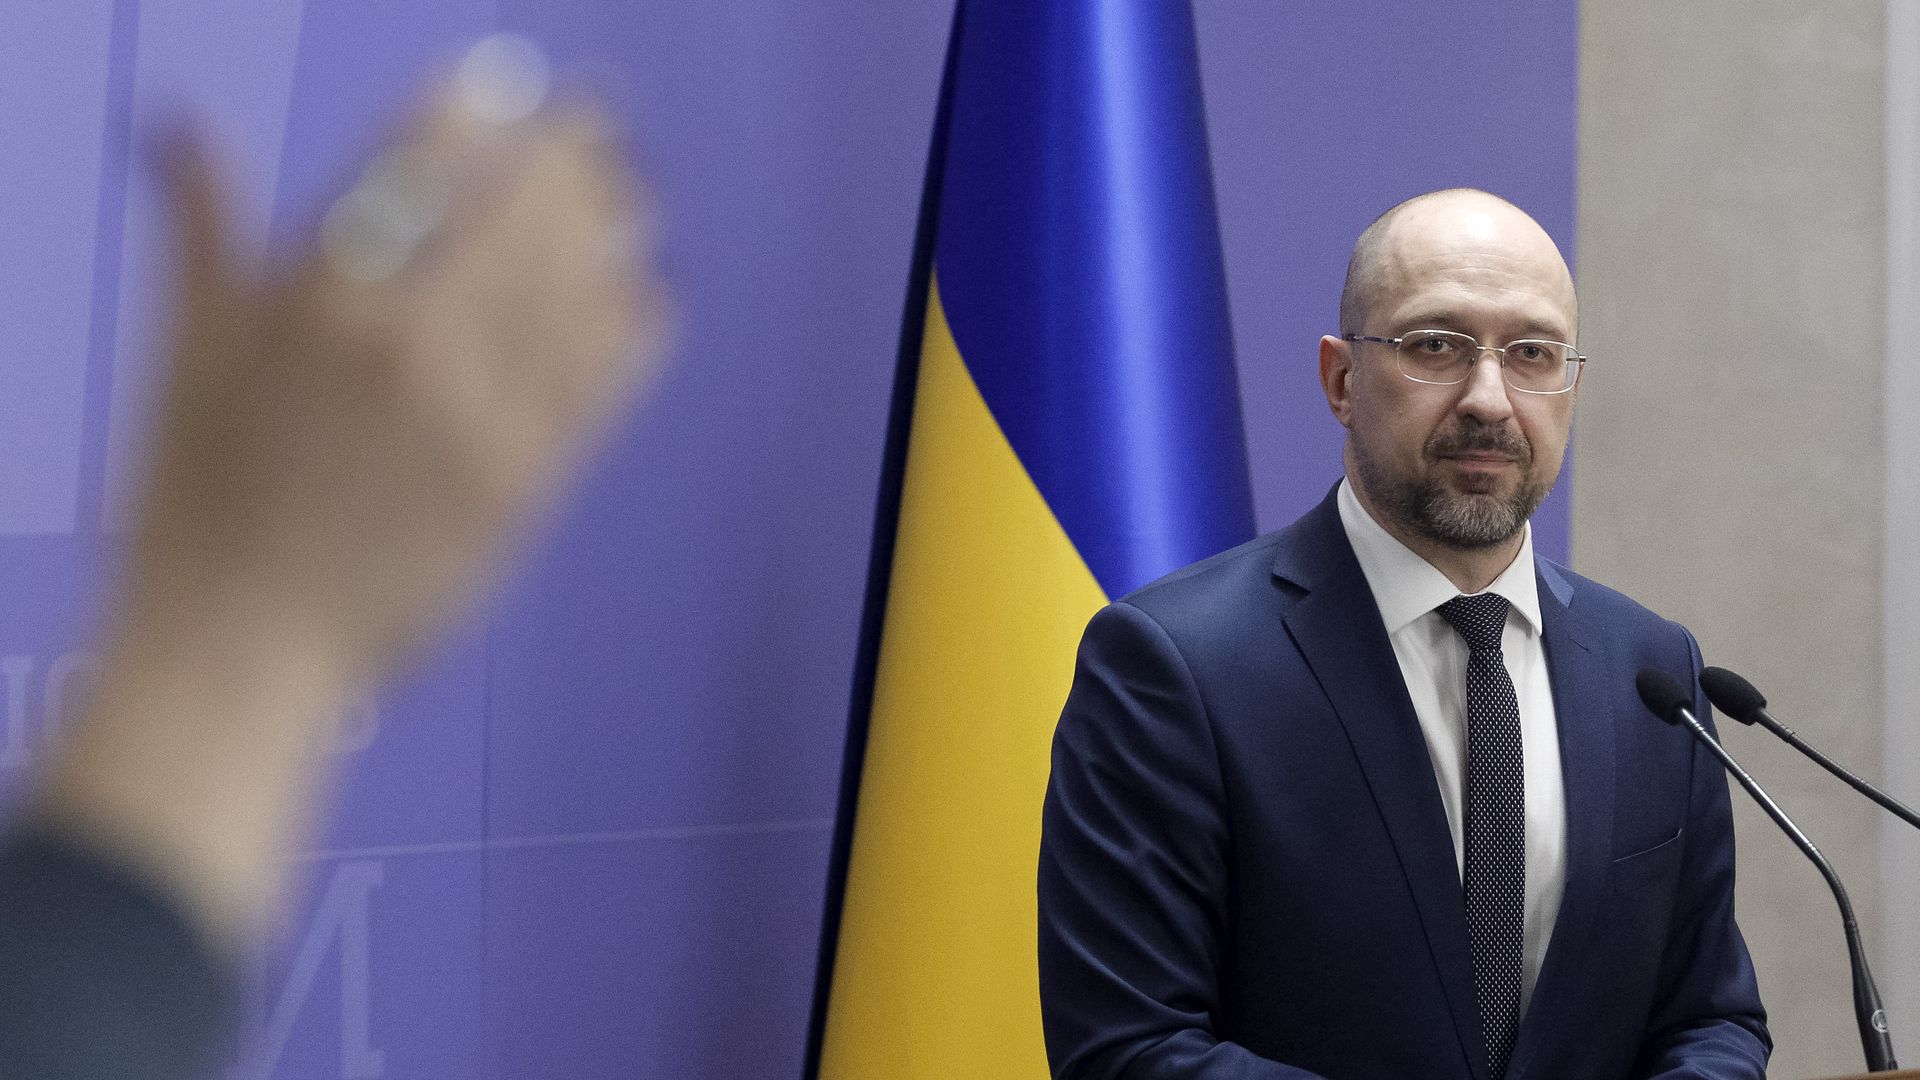 Ukraine's Prime Minister Denys Shmyhal during a press conference in Kyiv on March 2020.